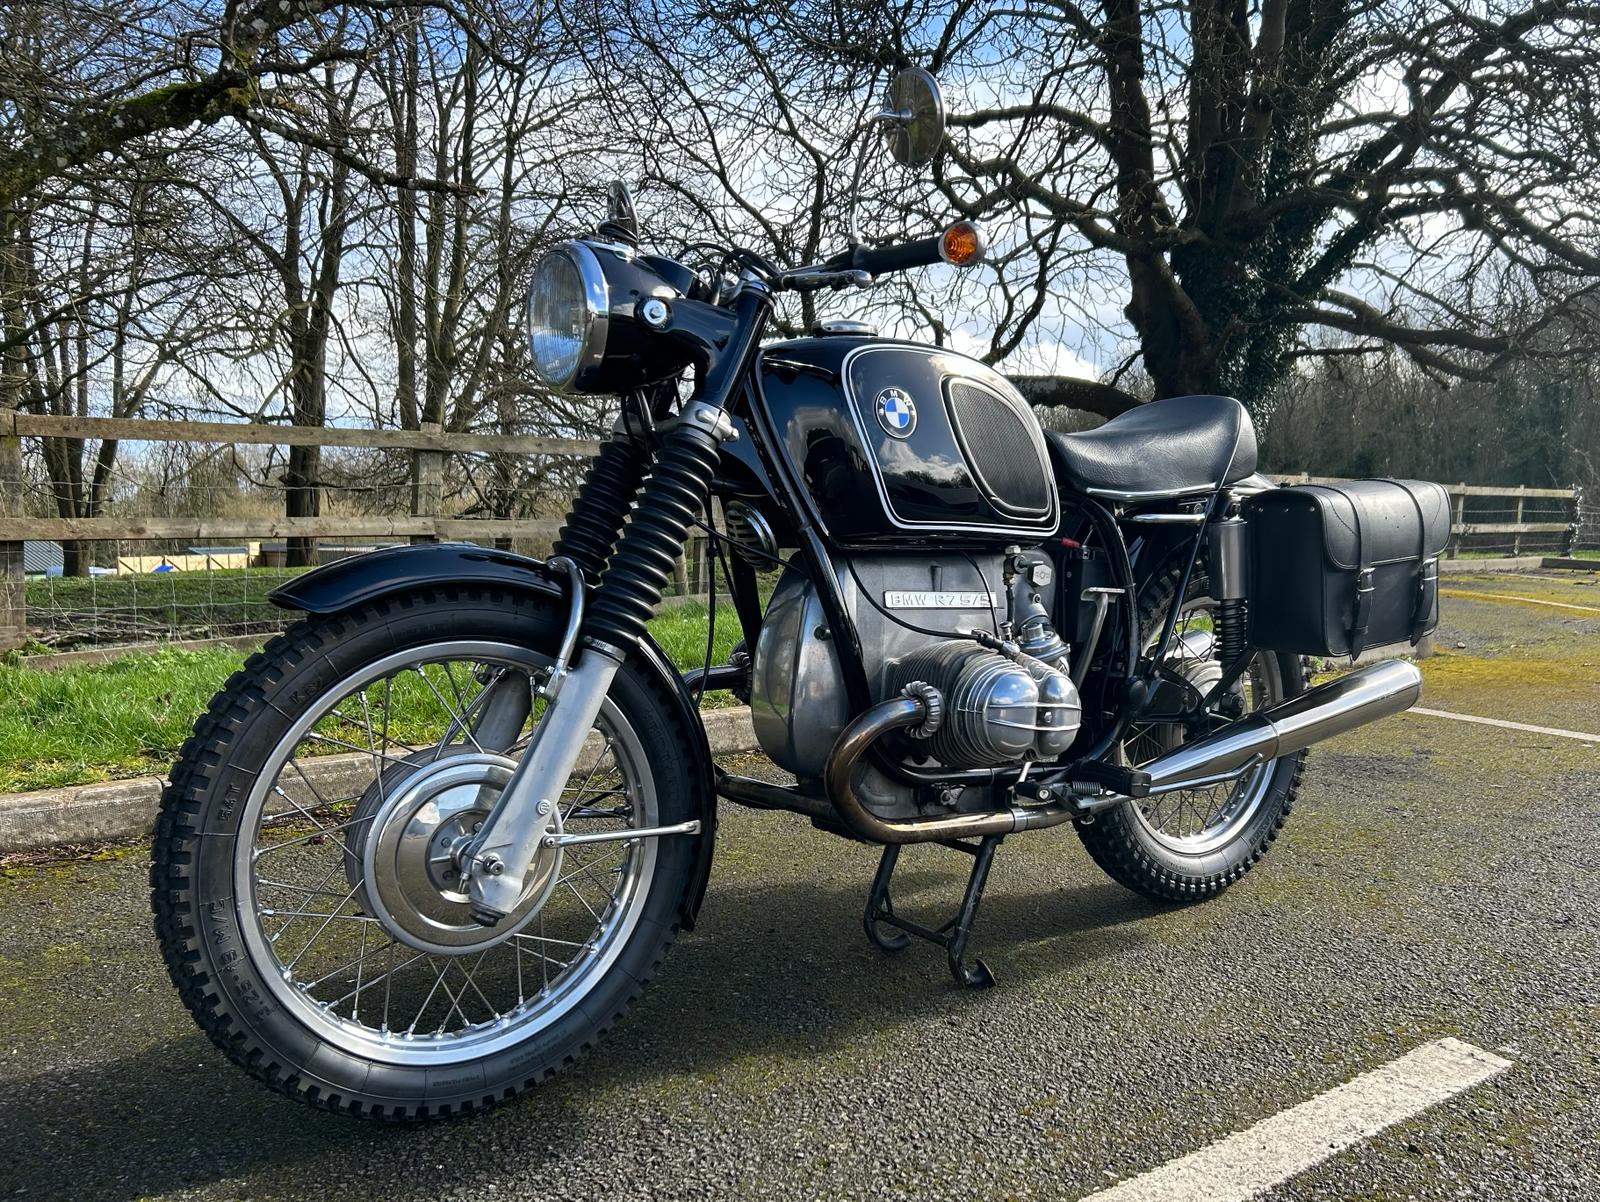 A BMW R75/5 MOTORCYCLE .1971. 72452 MILES. EXCELLENT WELL RESTORED CONDITION, V5, MOT AND TAX - Image 9 of 17